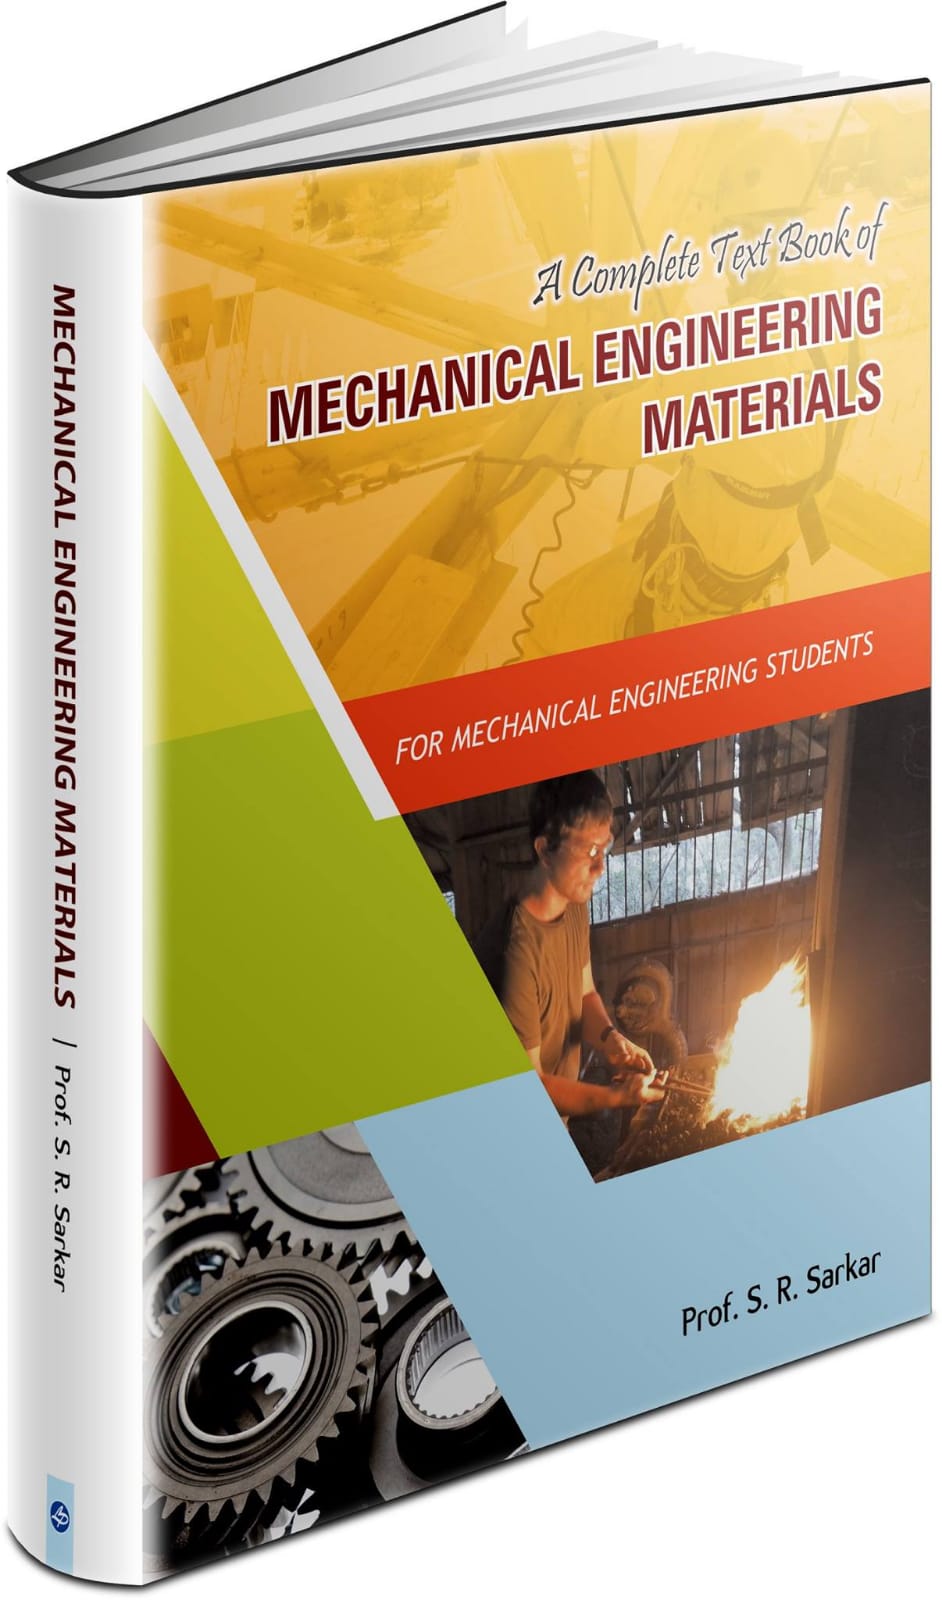 A Complete Text Book Of MECHANICAL ENGINEERING MATERIALS